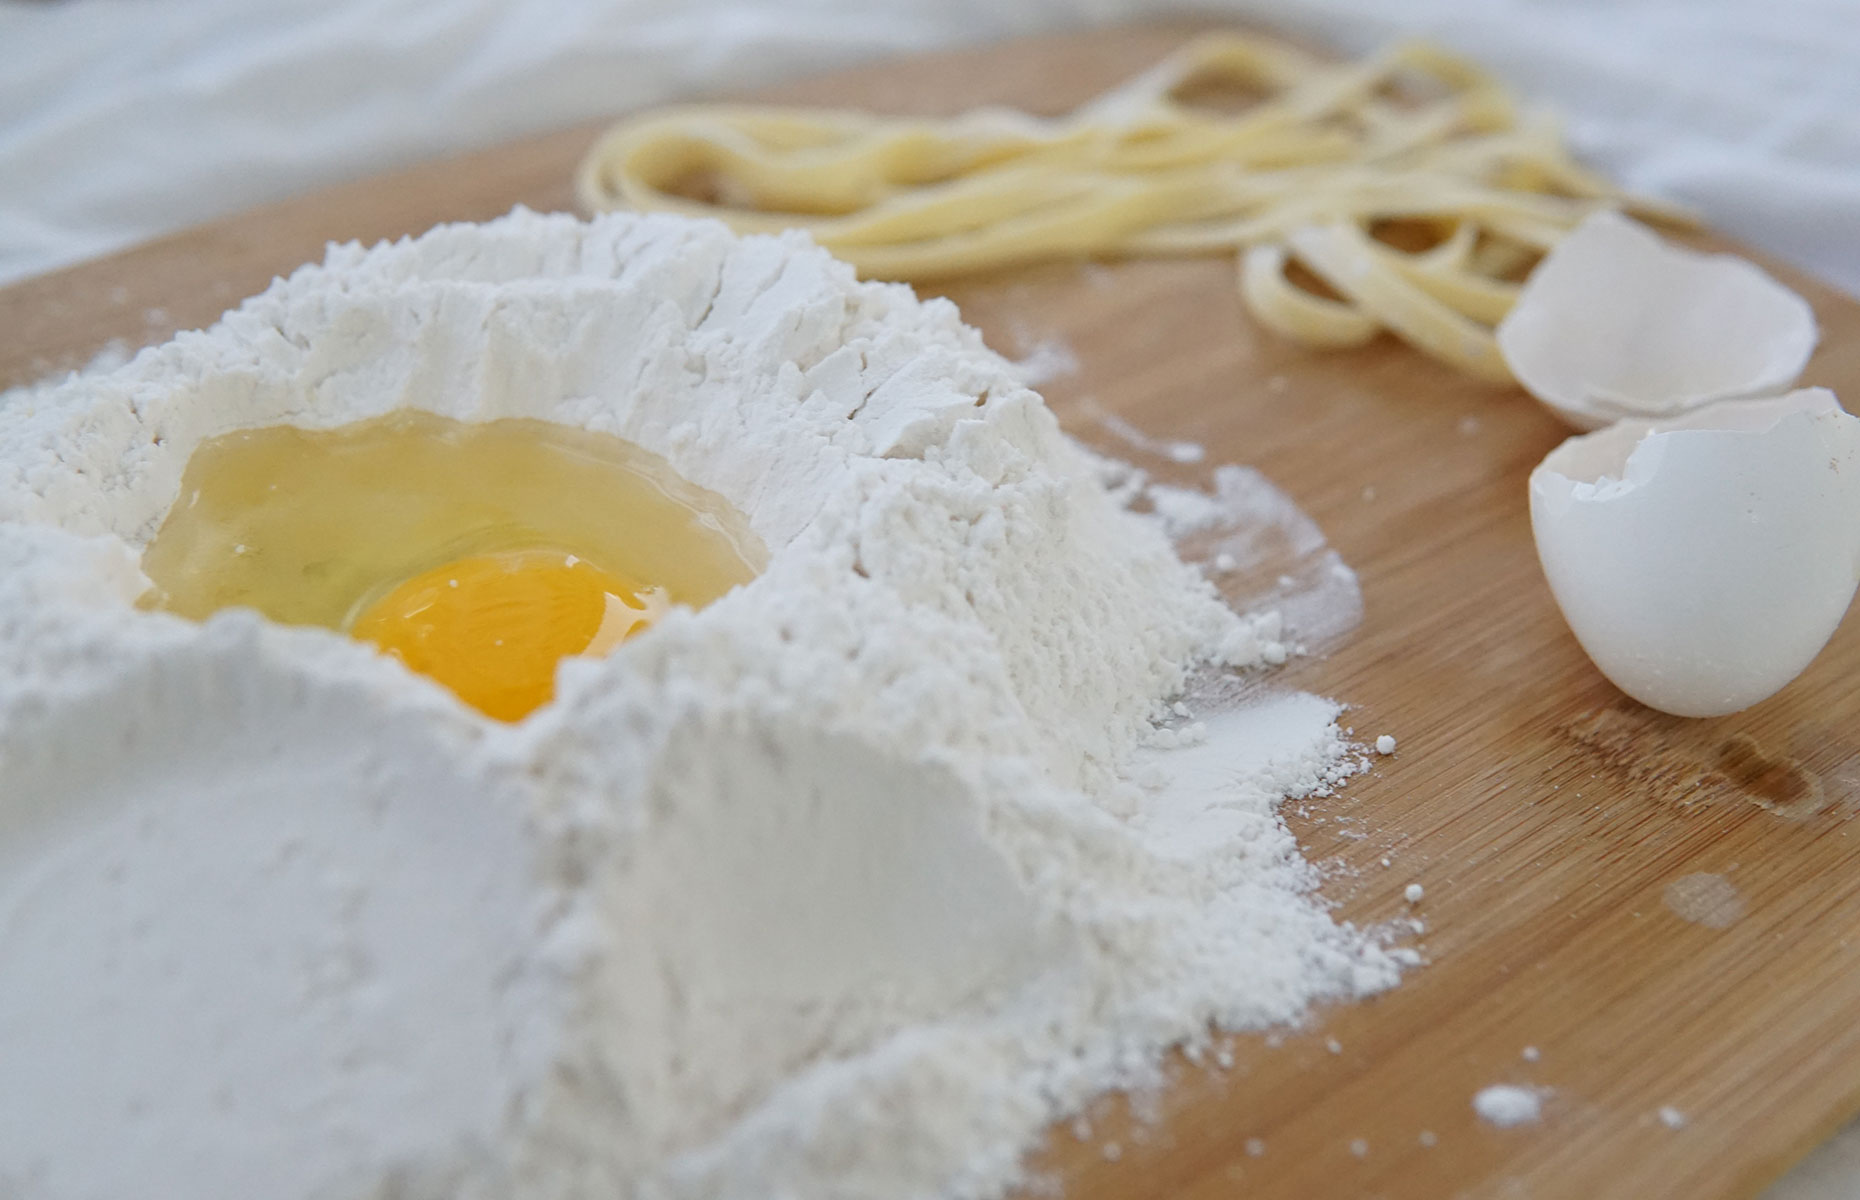 Flour and an egg is all you need for fresh pasta